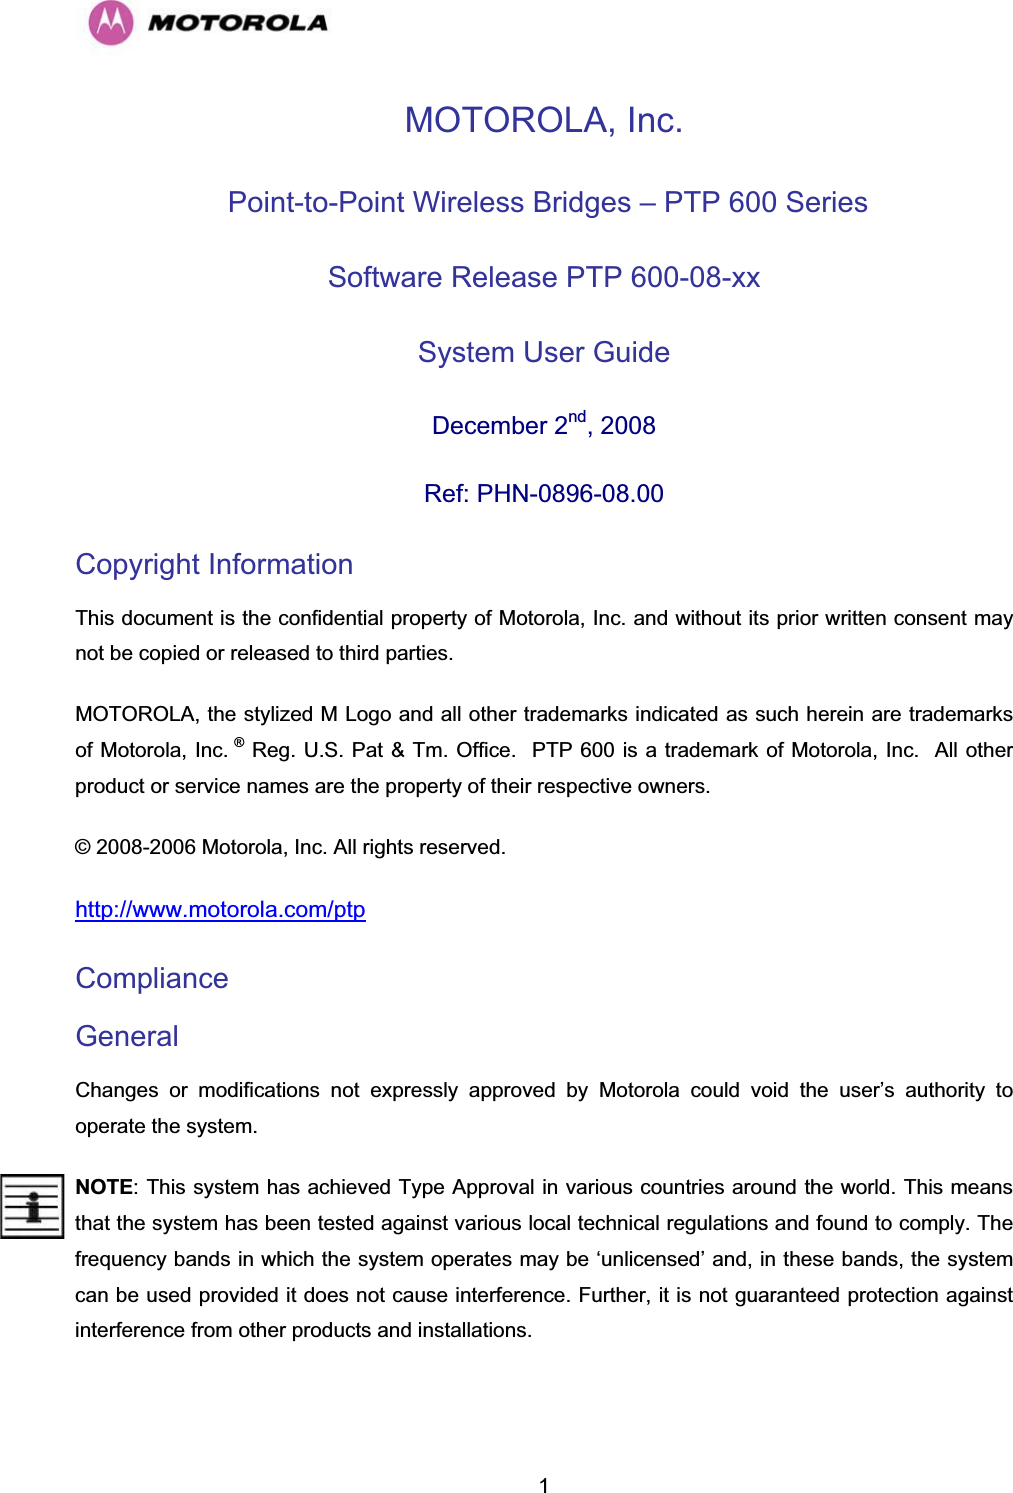   1MOTOROLA, Inc.  Point-to-Point Wireless Bridges – PTP 600 Series Software Release PTP 600-08-xx System User Guide  December 2nd, 2008 Ref: PHN-0896-08.00 Copyright Information This document is the confidential property of Motorola, Inc. and without its prior written consent may not be copied or released to third parties.  MOTOROLA, the stylized M Logo and all other trademarks indicated as such herein are trademarks of Motorola, Inc. ® Reg. U.S. Pat &amp; Tm. Office.  PTP 600 is a trademark of Motorola, Inc.  All other product or service names are the property of their respective owners. © 2008-2006 Motorola, Inc. All rights reserved. http://www.motorola.com/ptp Compliance  General Changes or modifications not expressly approved by Motorola could void the user’s authority to operate the system.  NOTE: This system has achieved Type Approval in various countries around the world. This means that the system has been tested against various local technical regulations and found to comply. The frequency bands in which the system operates may be ‘unlicensed’ and, in these bands, the system can be used provided it does not cause interference. Further, it is not guaranteed protection against interference from other products and installations. 